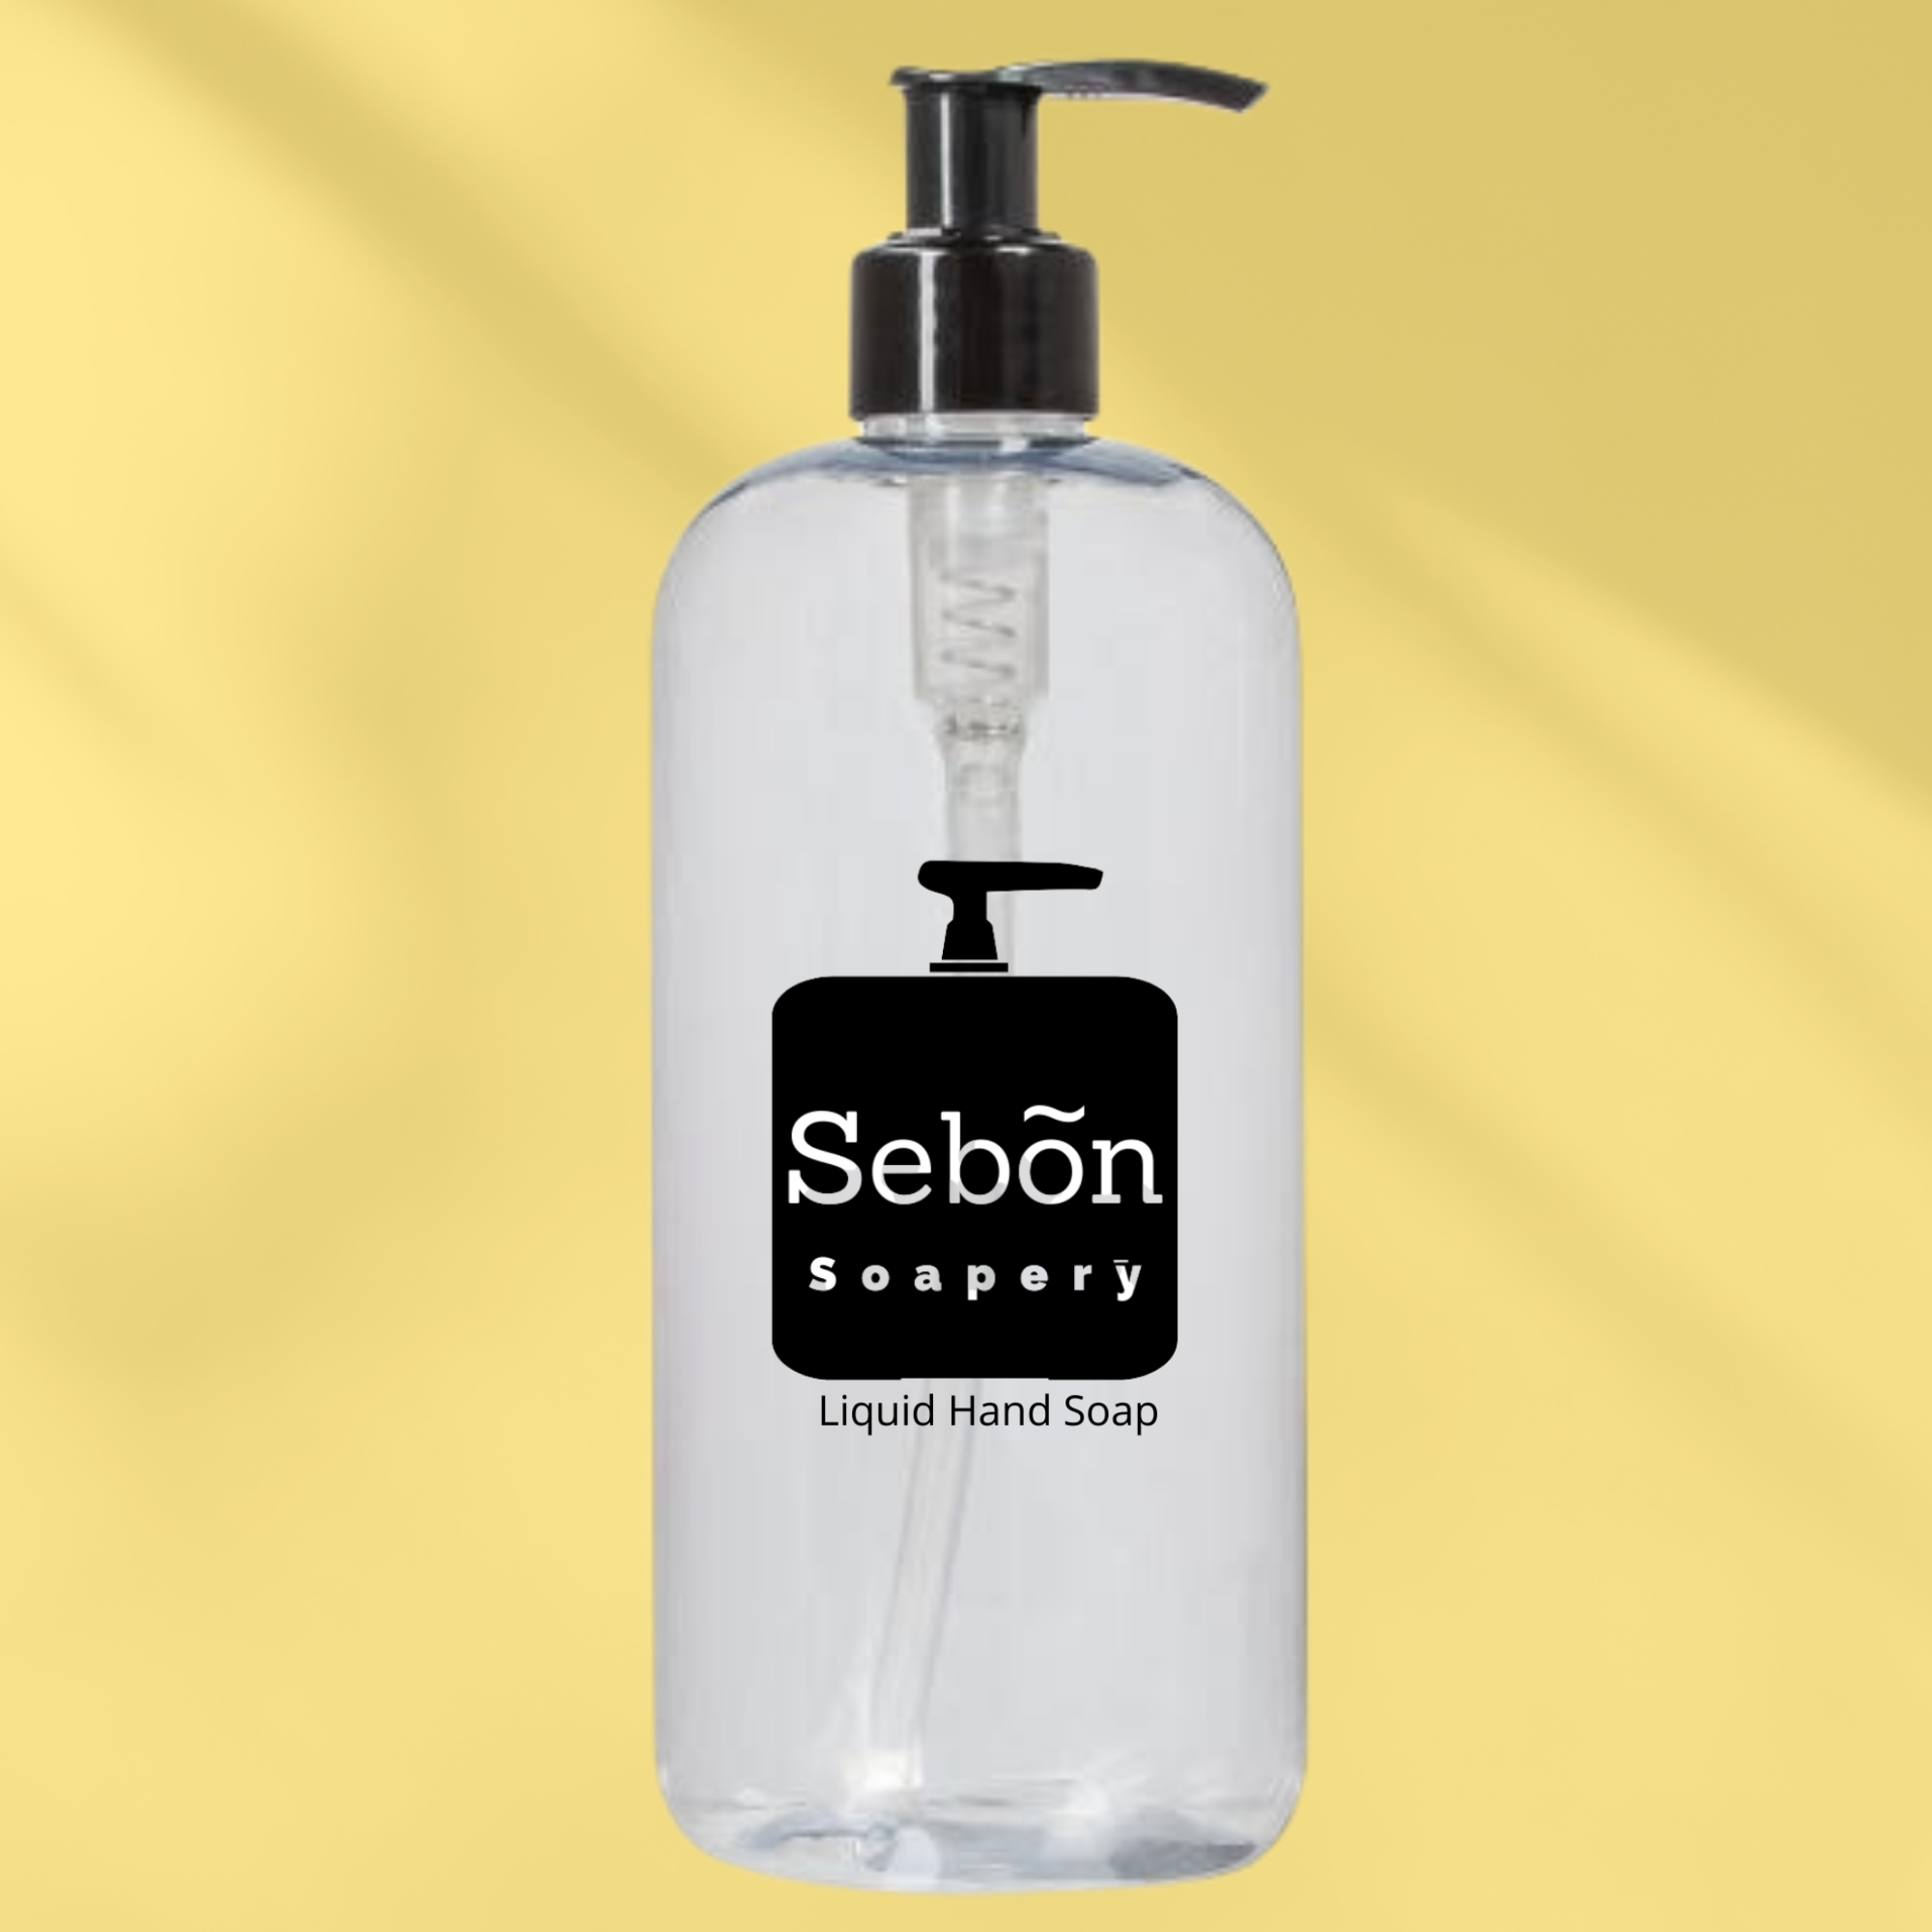 Sebon Butterfly Garden Scented Liquid Hand Soap with Olive Oil